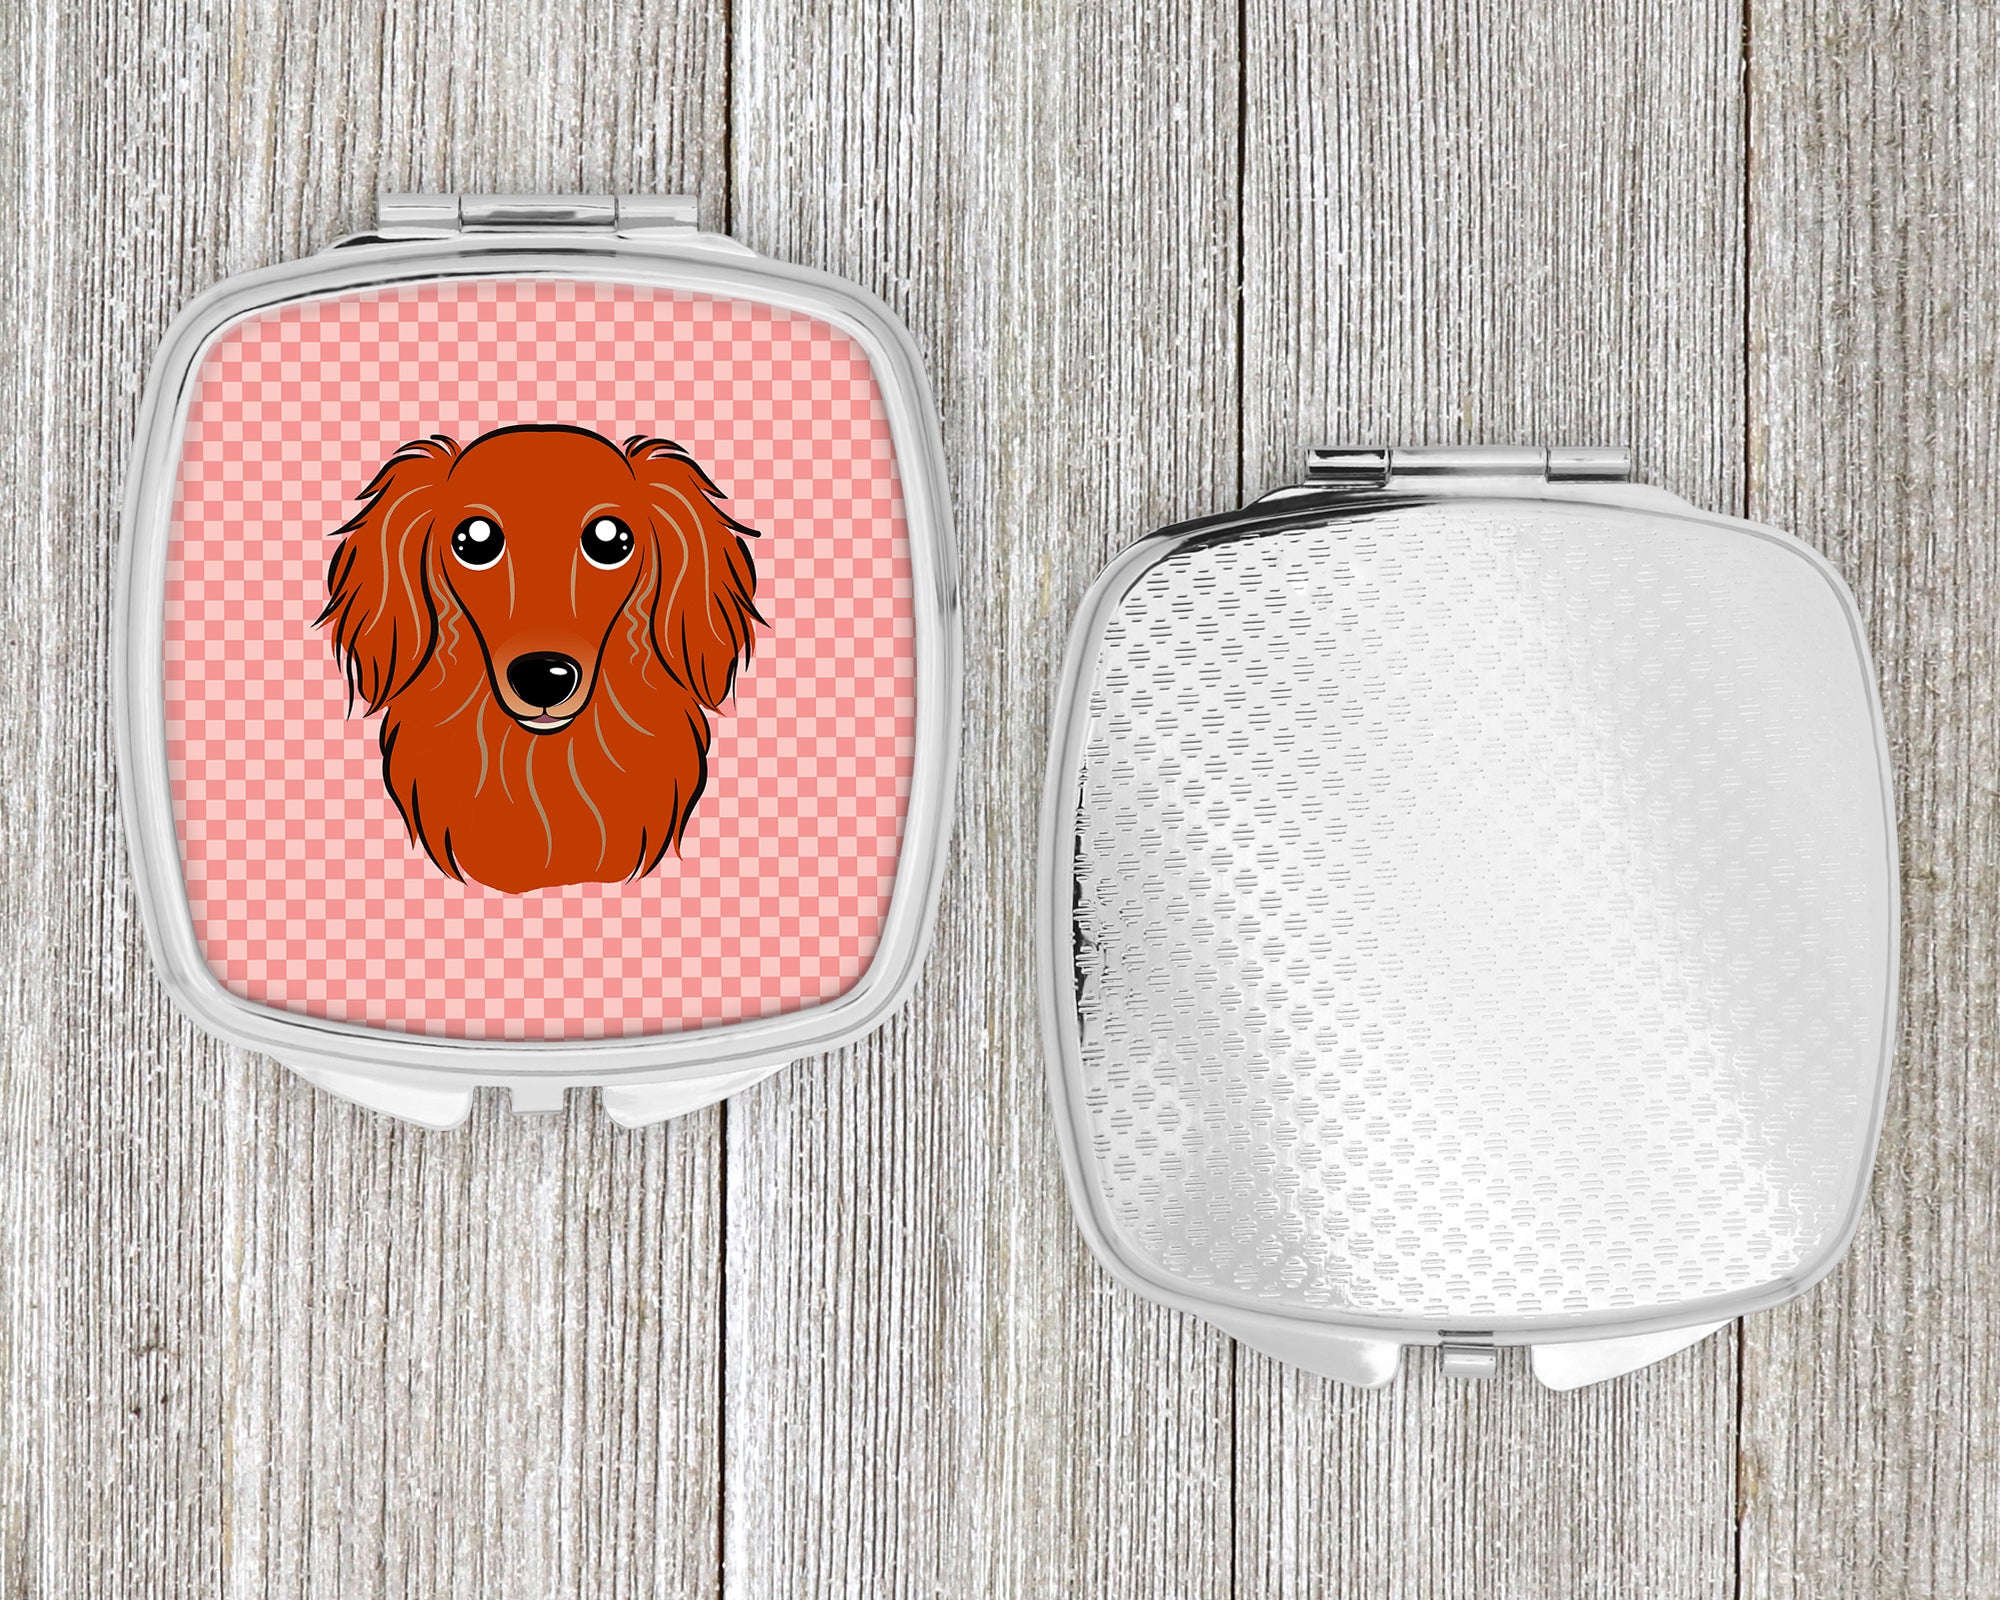 Checkerboard Pink Longhair Red Dachshund Compact Mirror BB1214SCM  the-store.com.